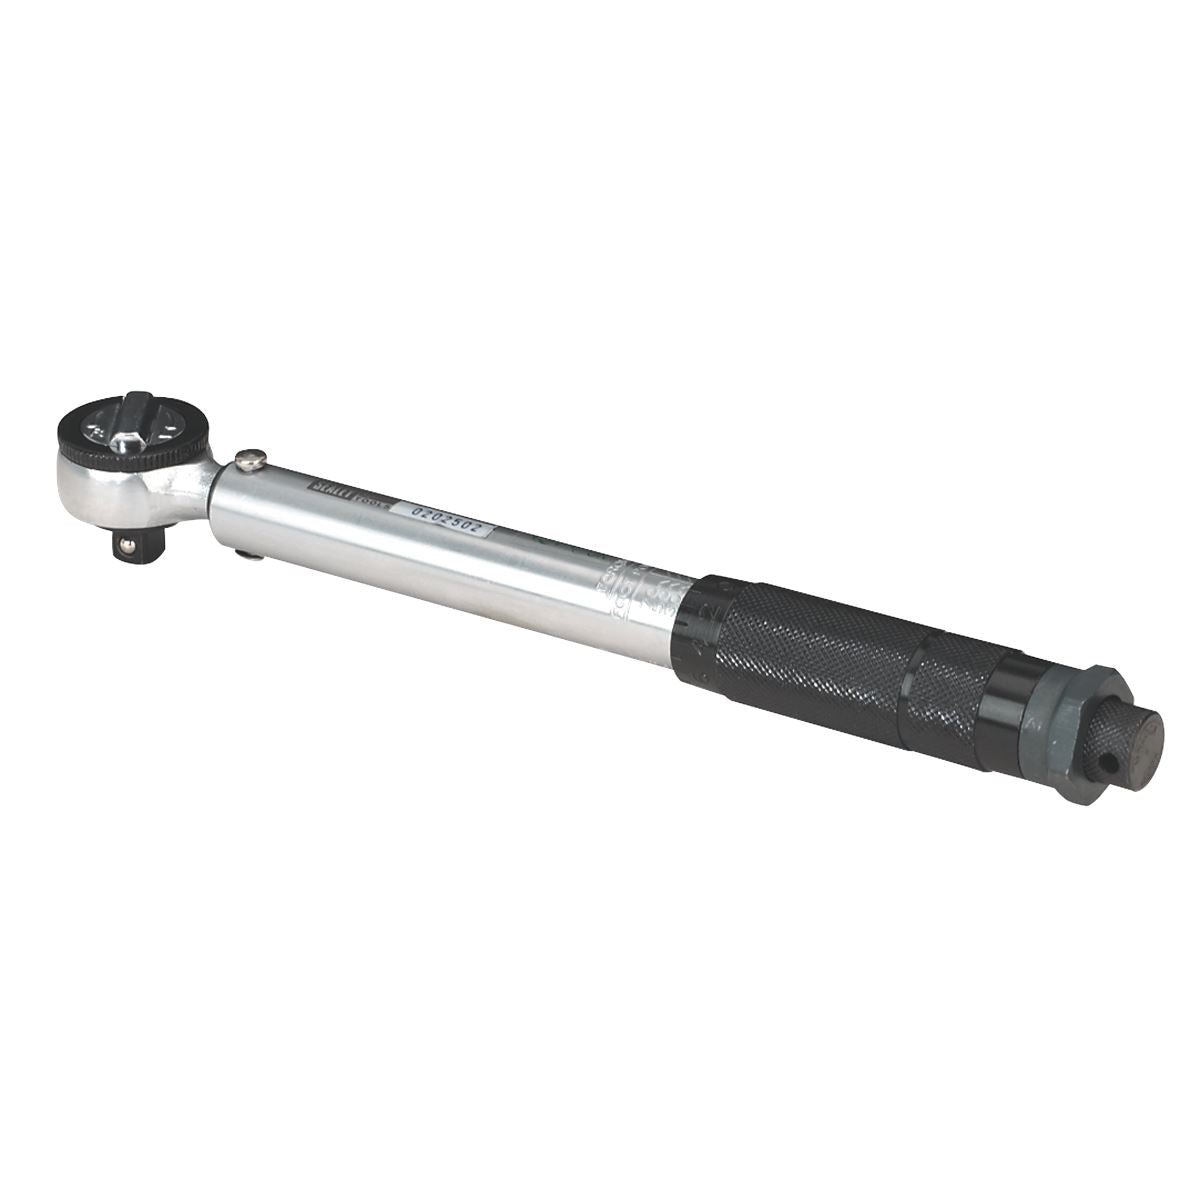 Sealey Micrometer Torque Wrench 3/8"Sq Drive Calibrated AK623